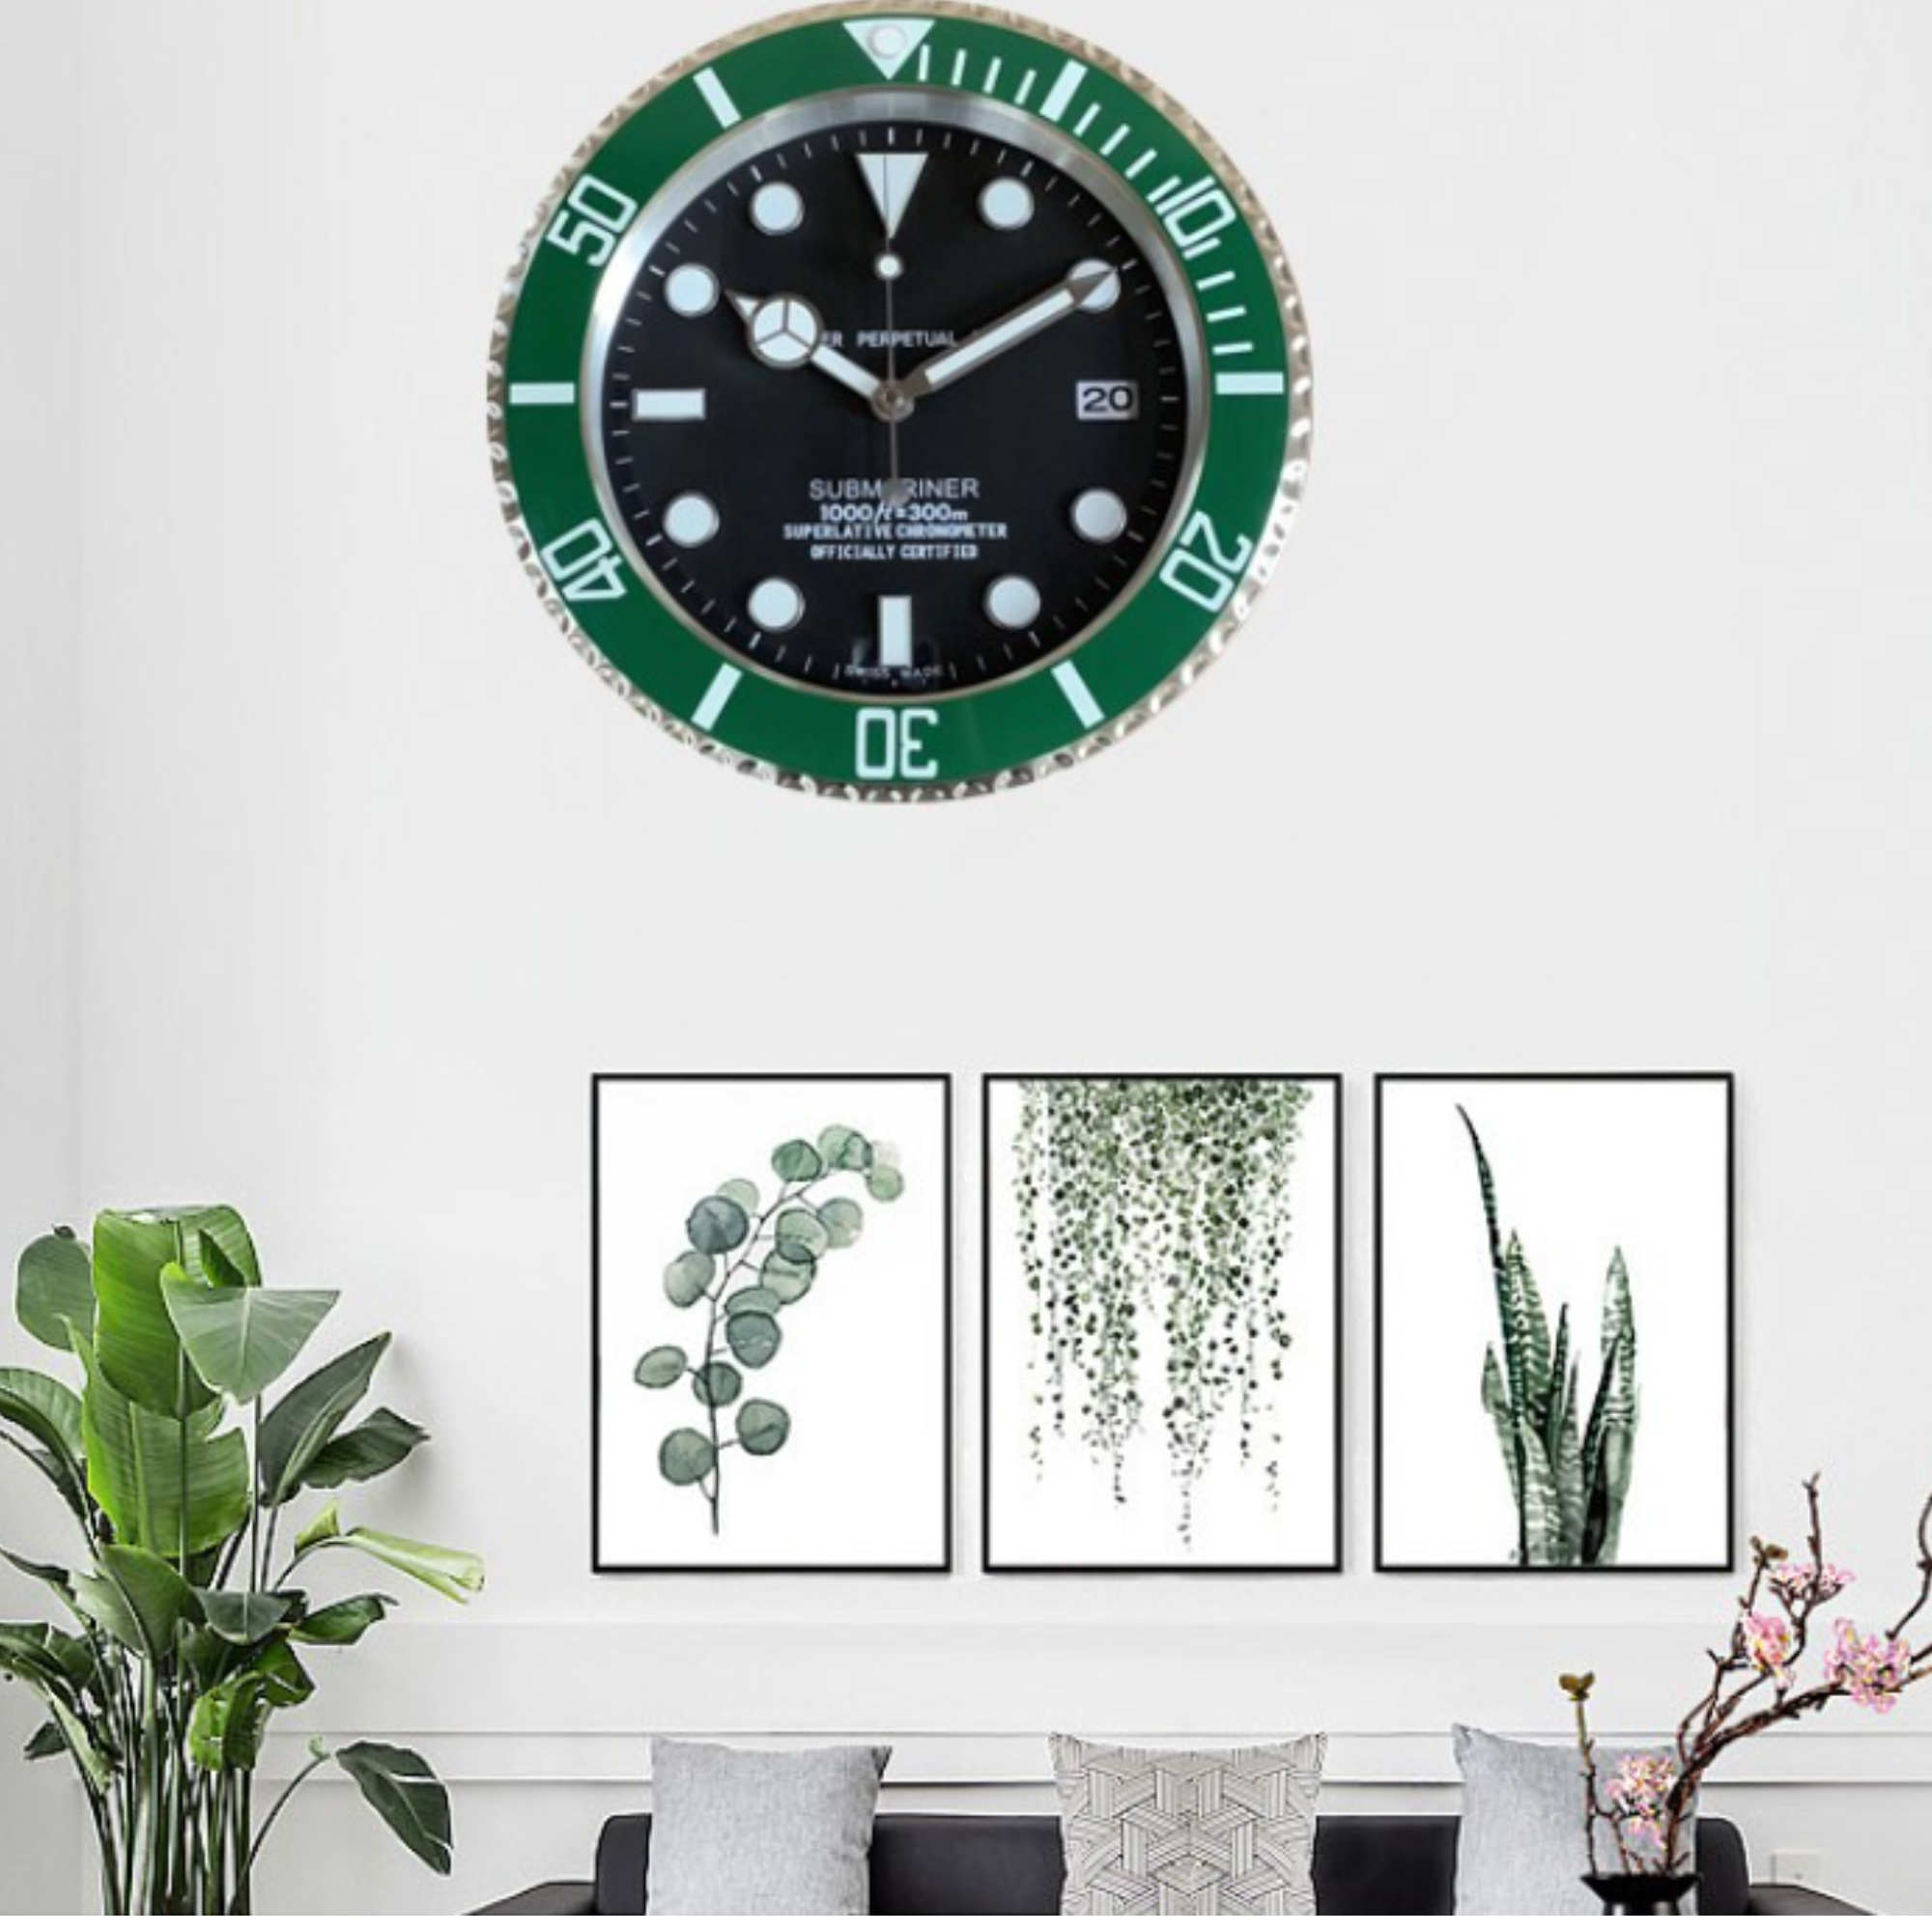 Metal Wall Clock With Timeless Swiss Design With Date Functionality| Wall Clock For Watch Enthusiasts | Perfect For Gifting